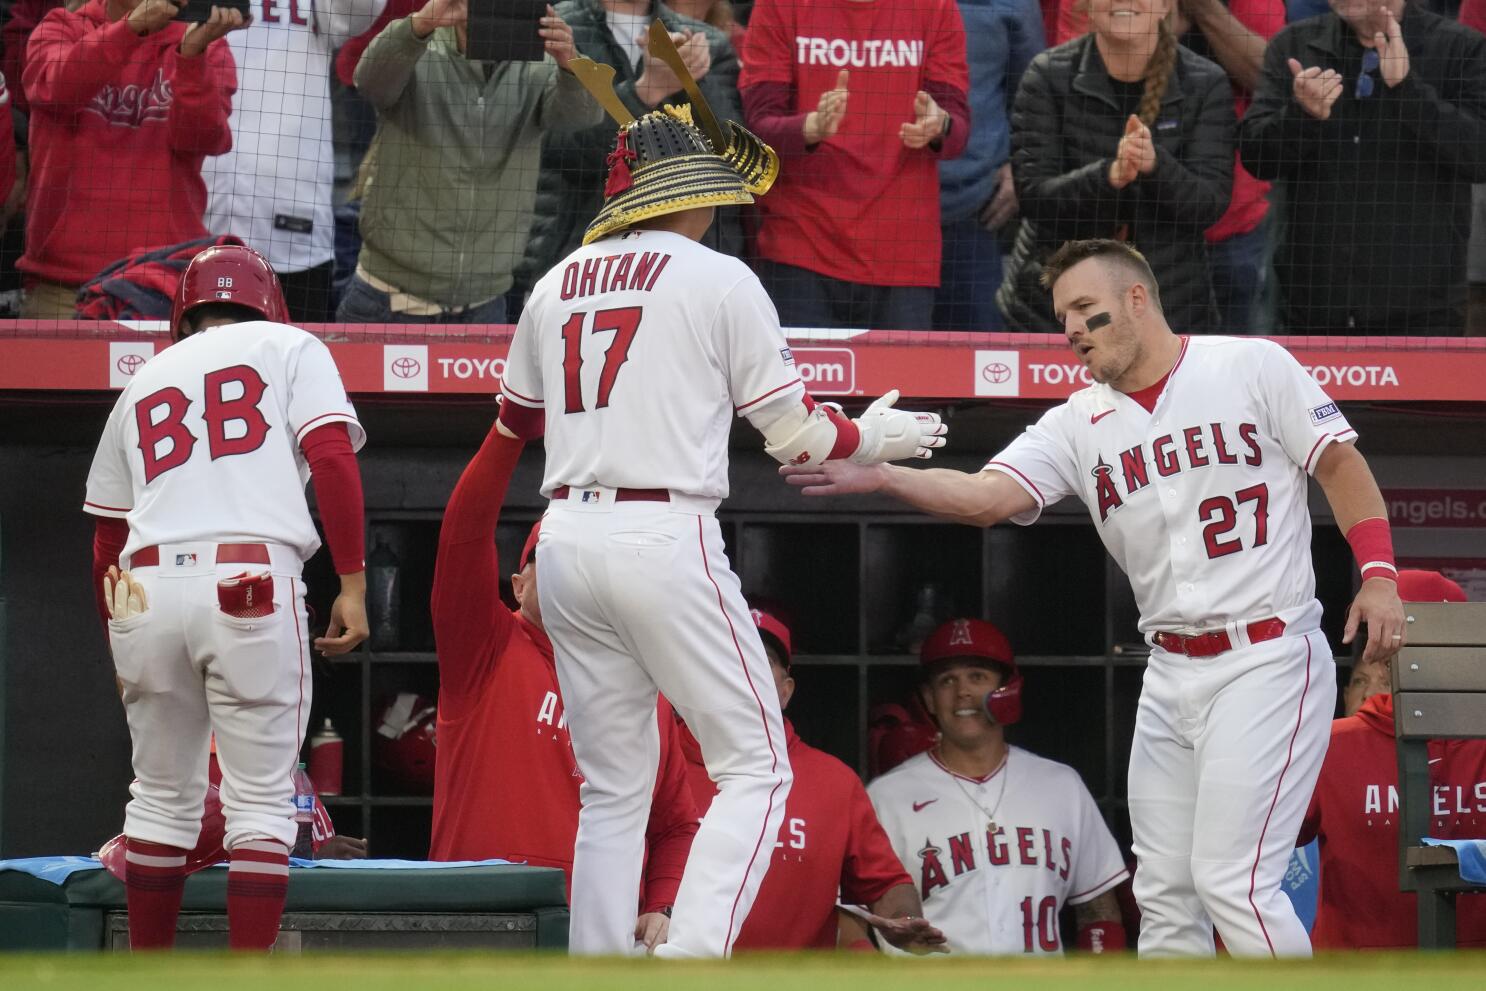 Los Angeles Angels Of Anaheim Mike Trout And Shohei Ohtani Sports